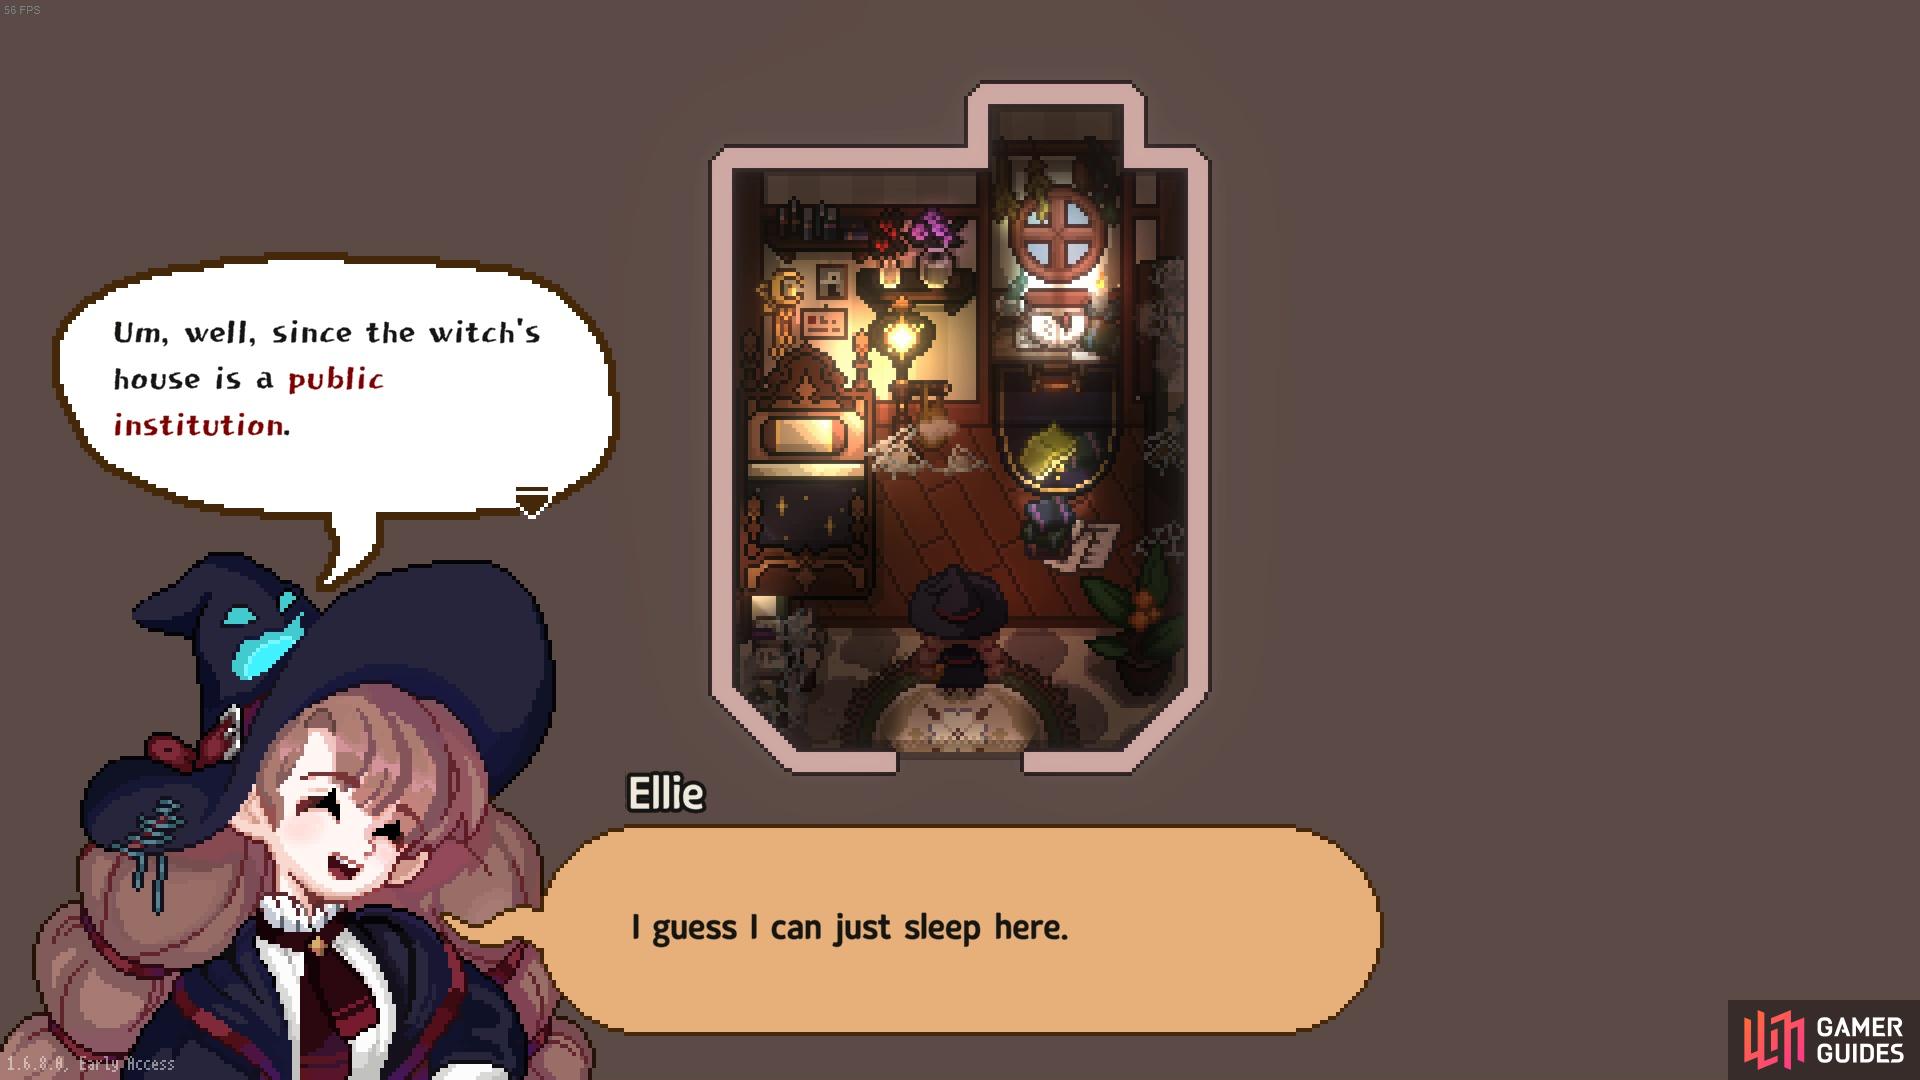 The Witch’s House is a good a place as any to sleep!